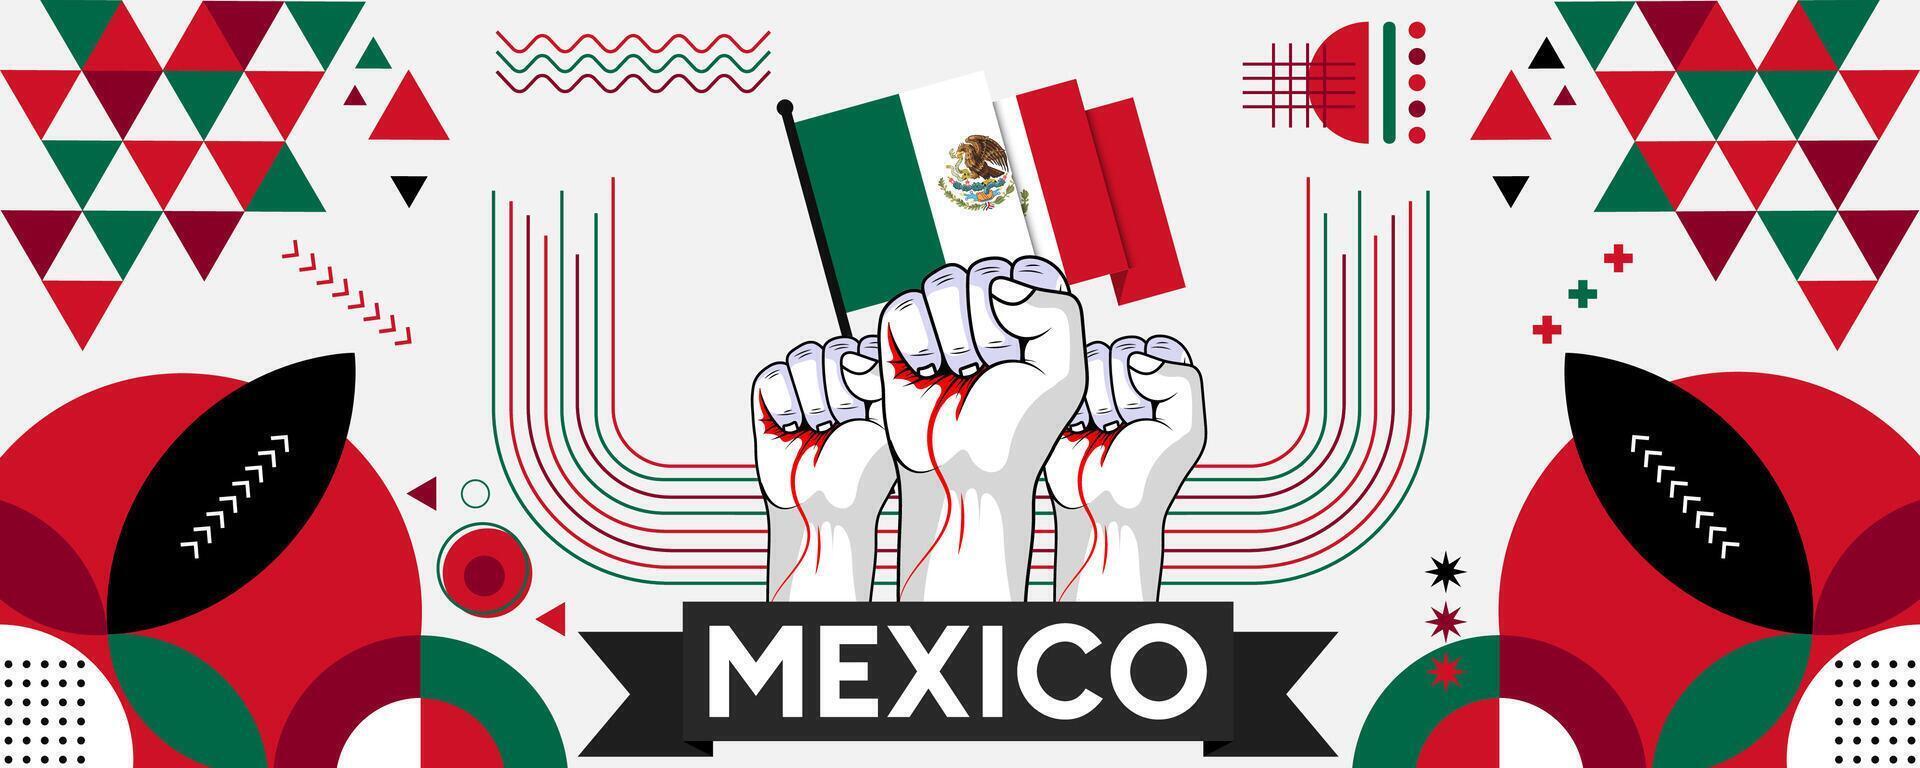 Mexico national or independence day banner for country celebration. Flag of Mexico with raised fists. Modern retro design with typorgaphy abstract geometric icons. Vector illustration.